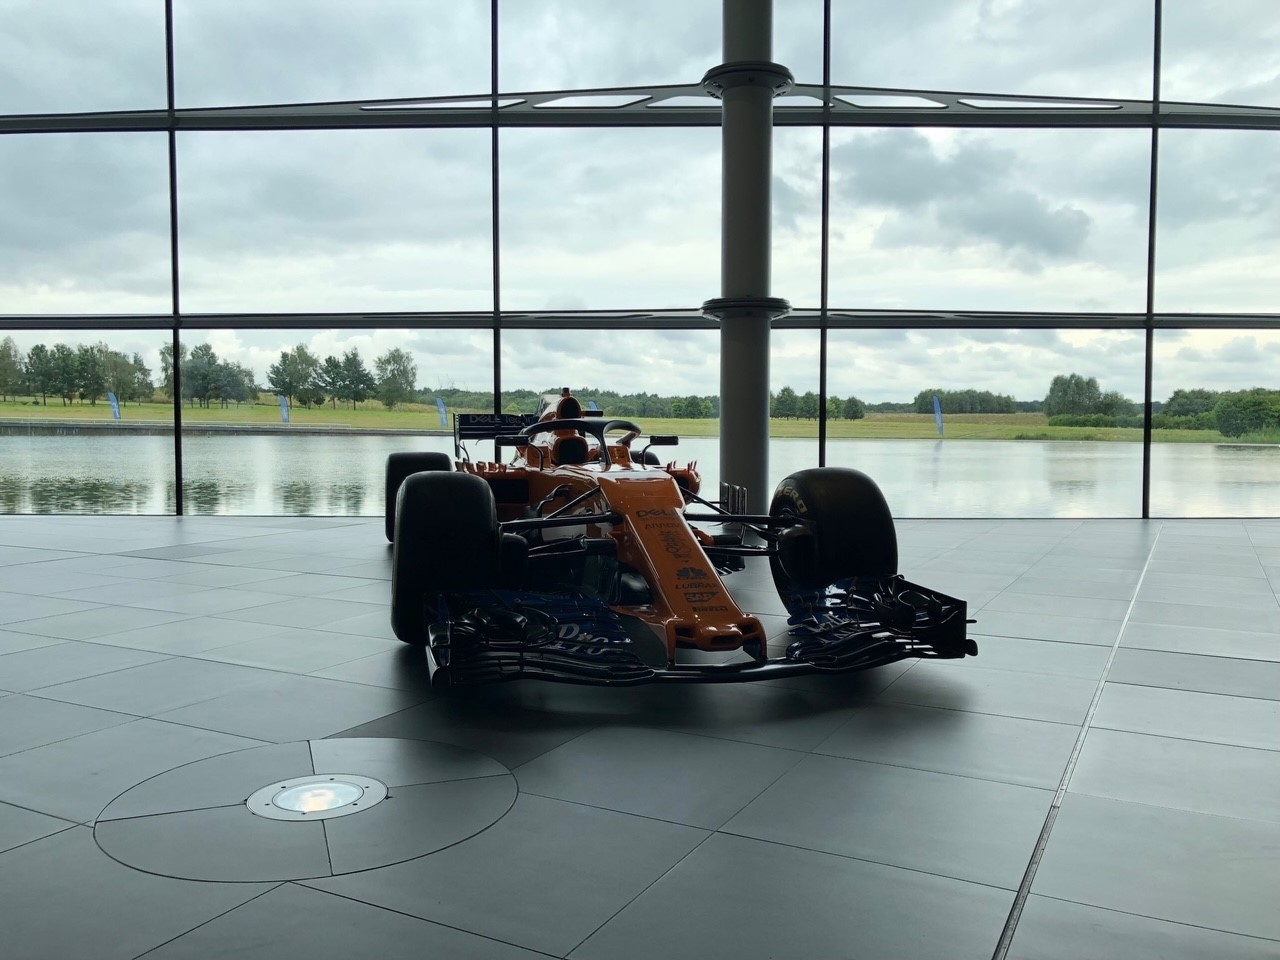 McLaren F1 with Hilton Honors